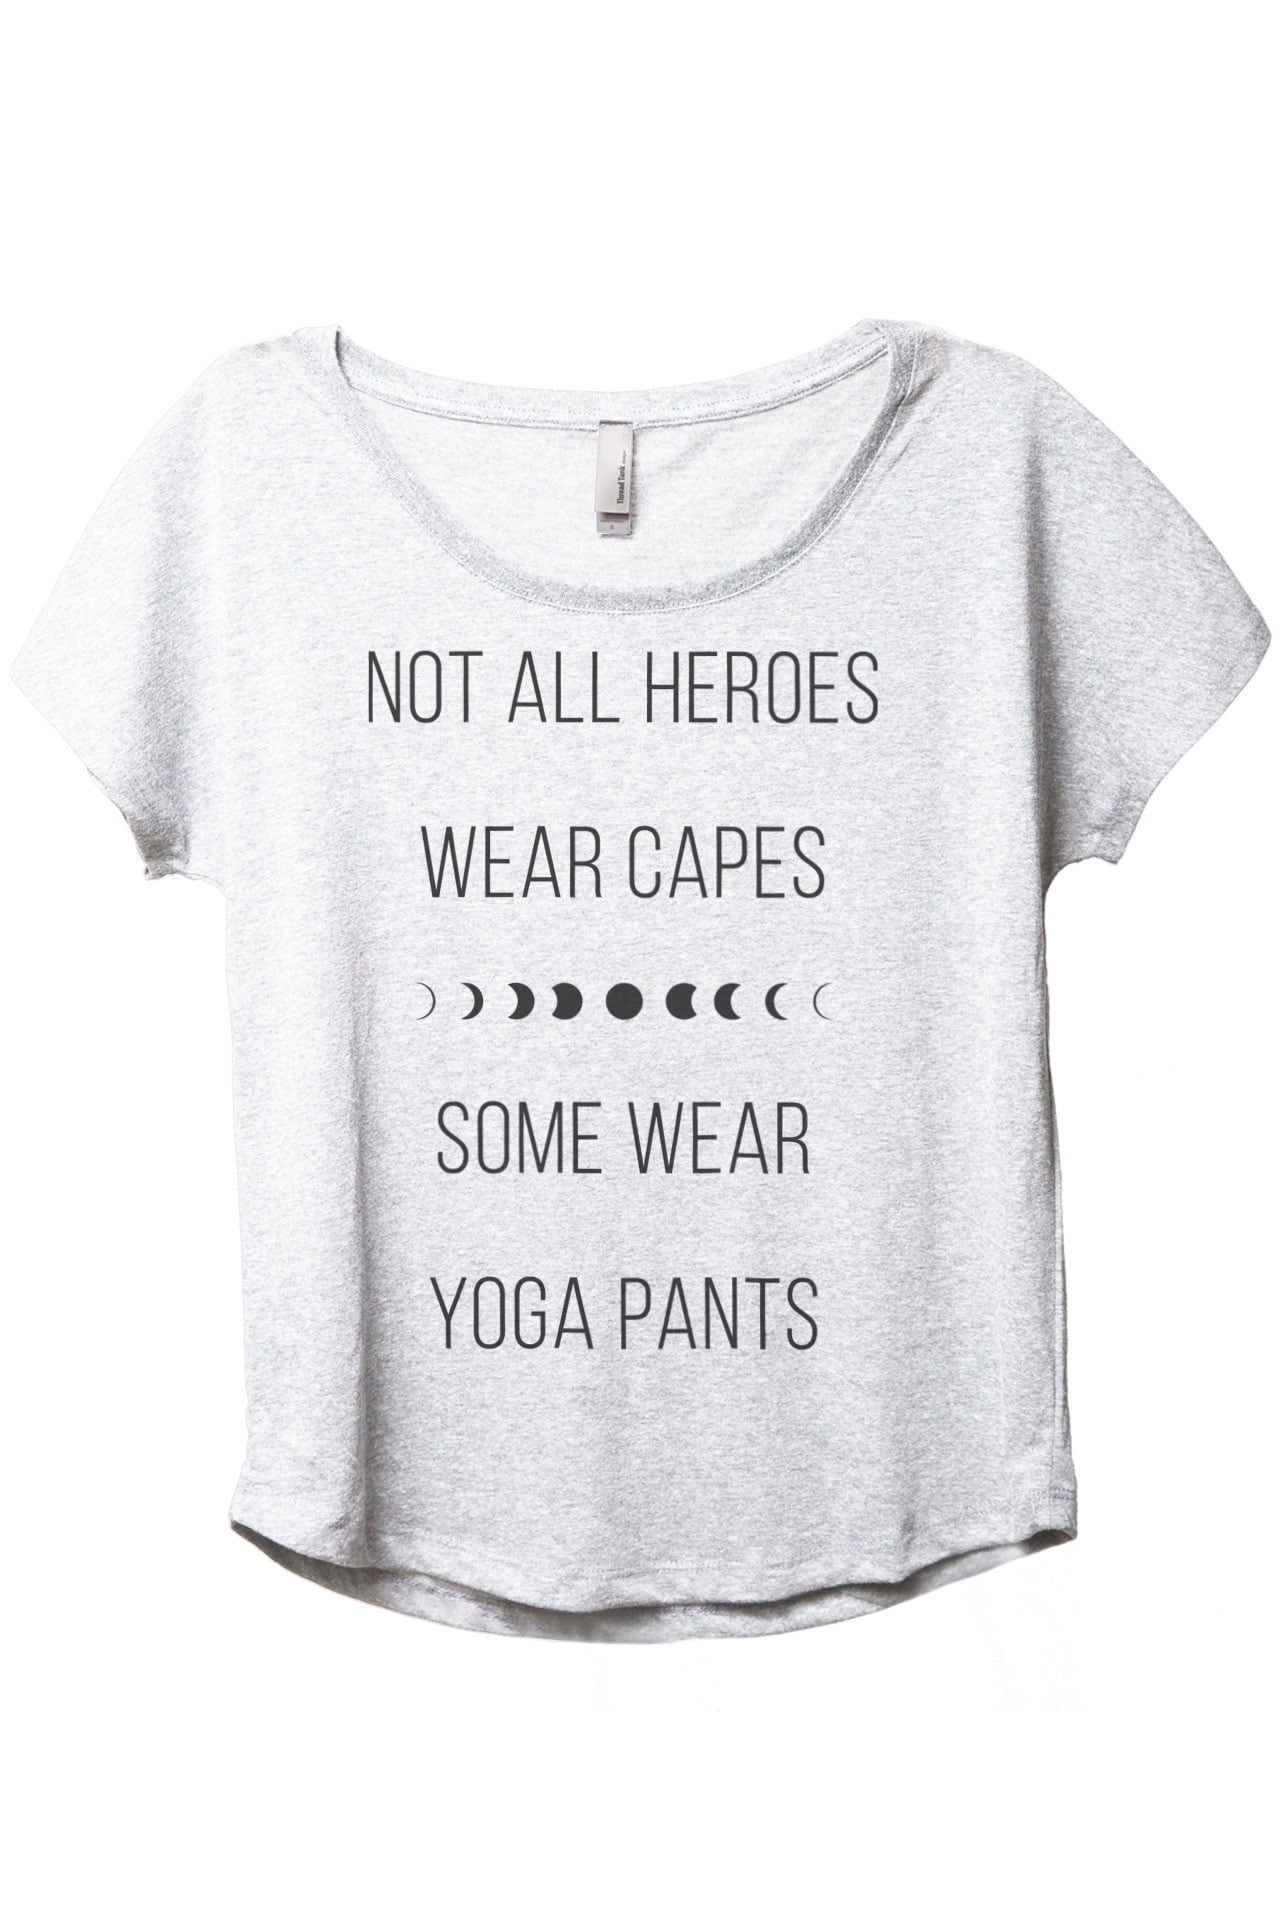 Not All Heroes Wear Capes Some Wear Yoga Pants Women's Fashion Slouchy  Dolman T-Shirt Tee Heather White Large 